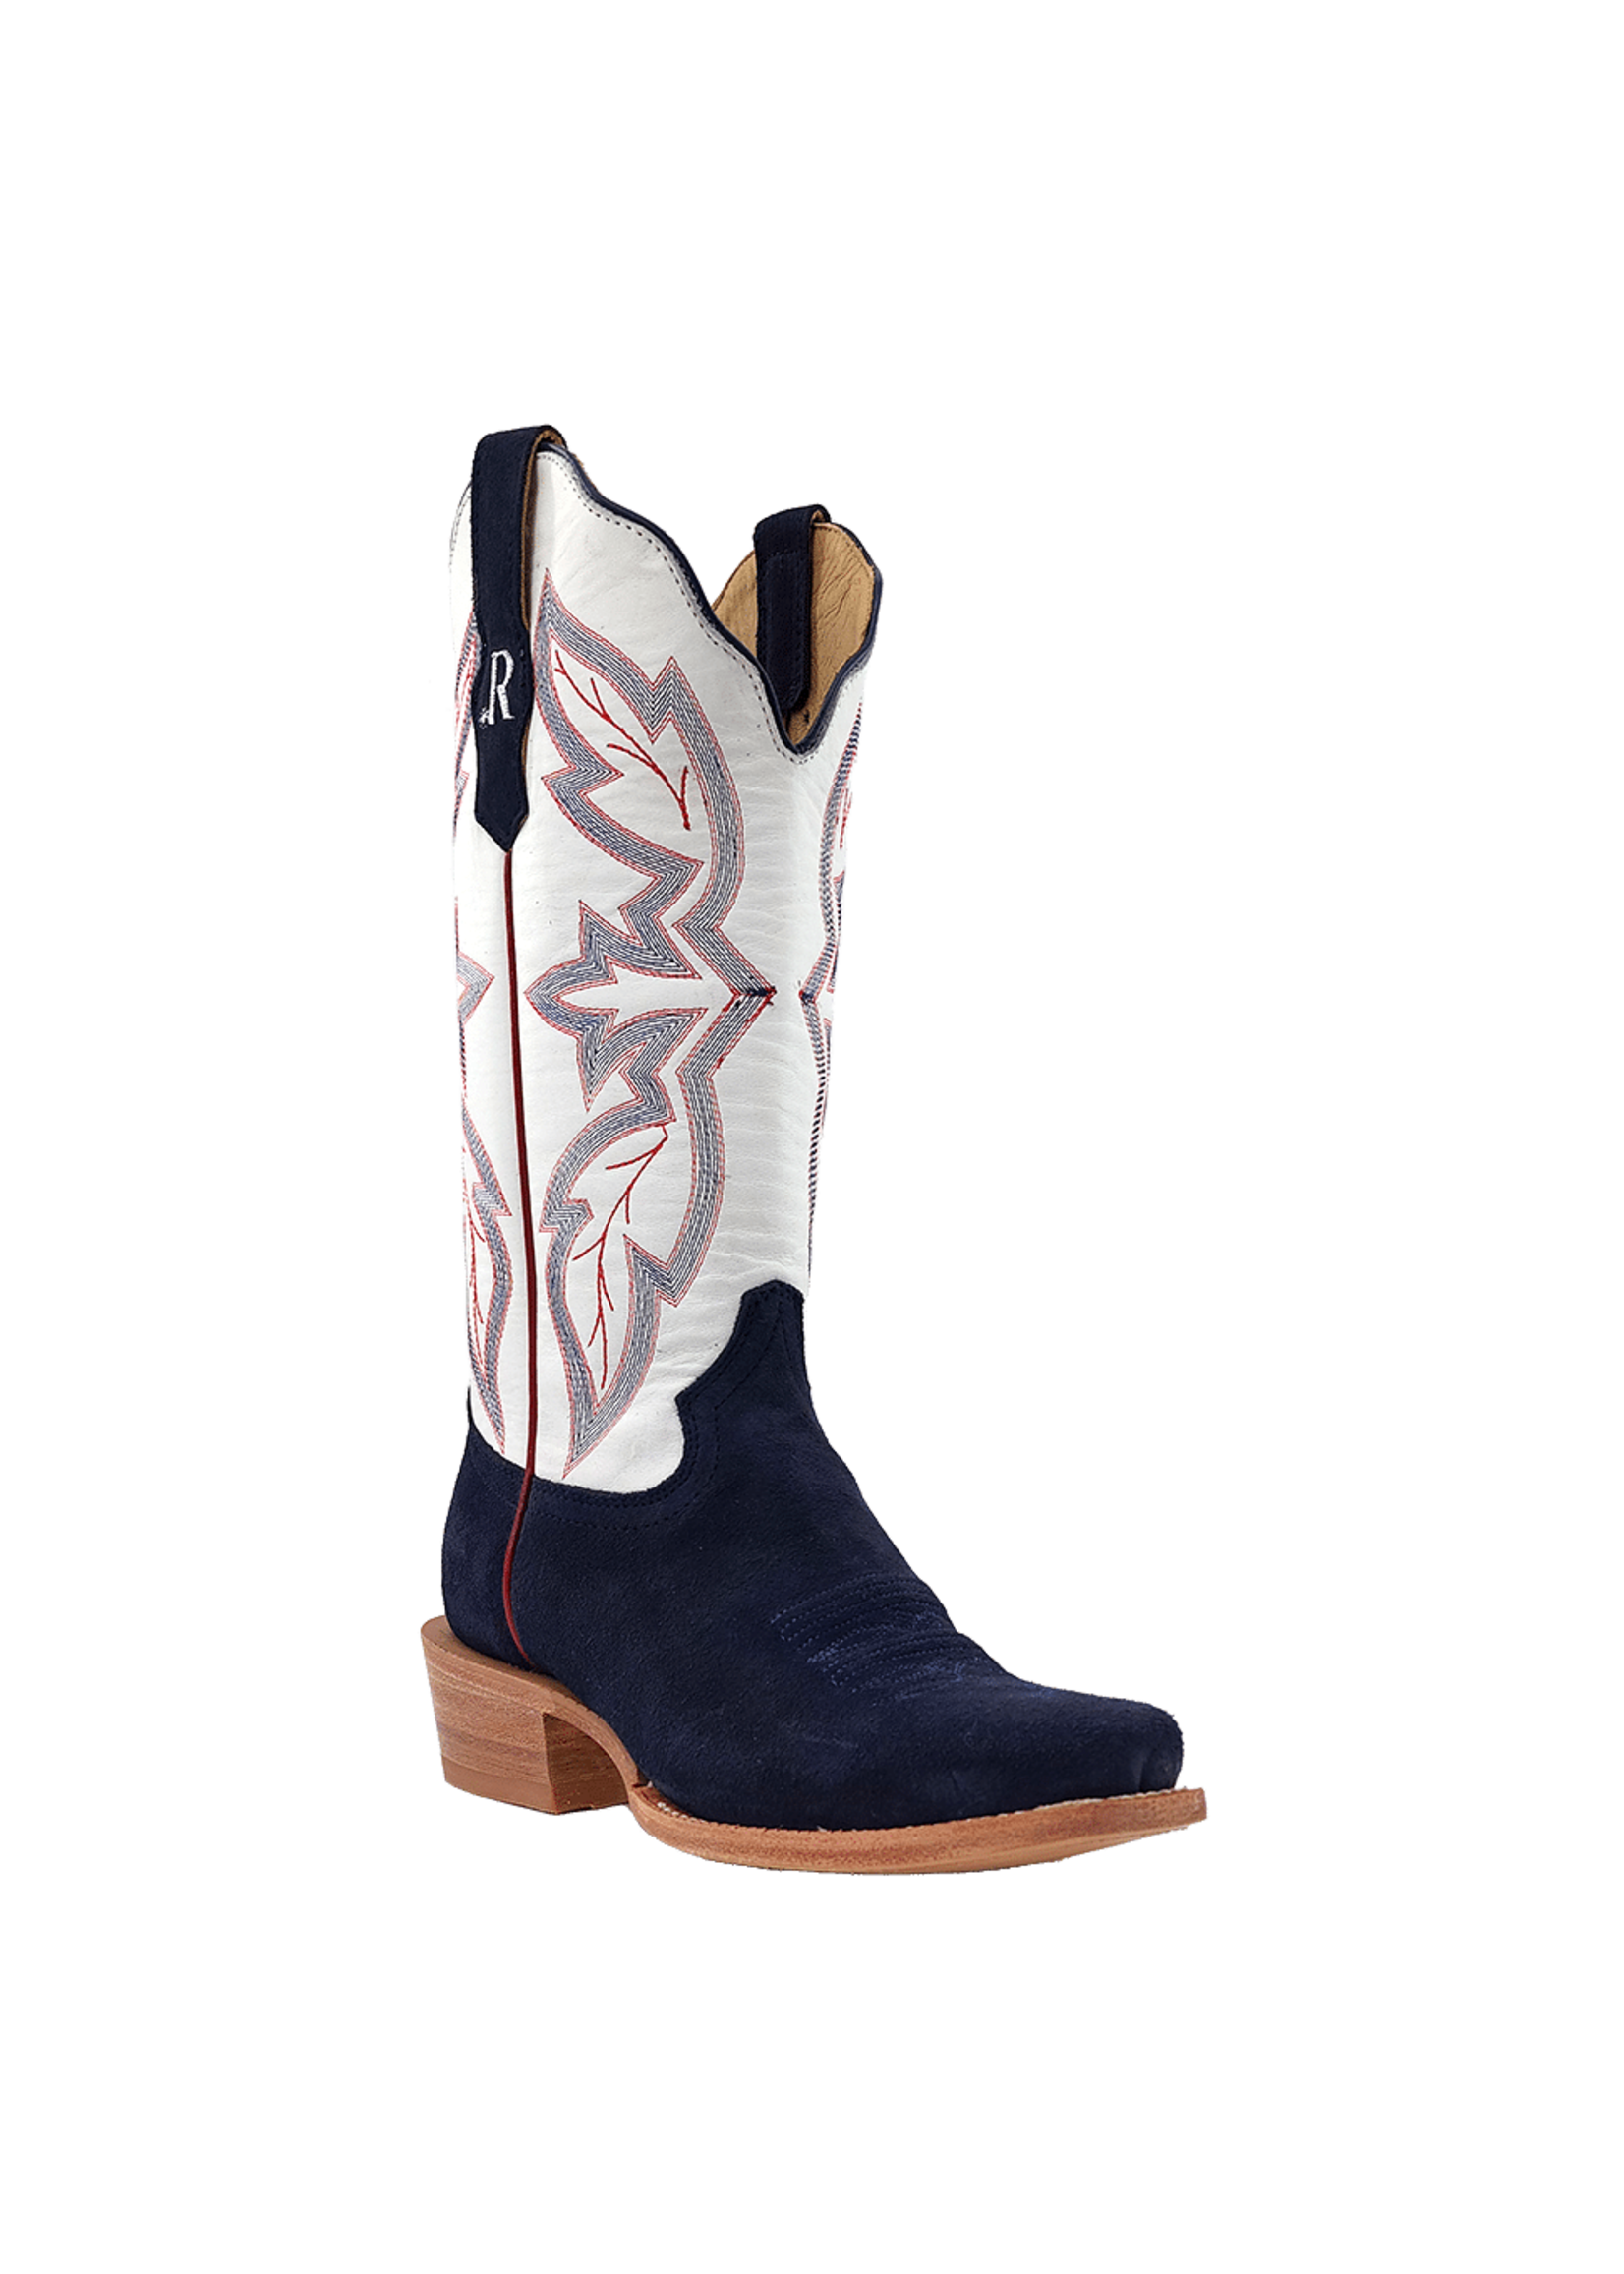 R Watson Wms Midnight Rough Out Boot